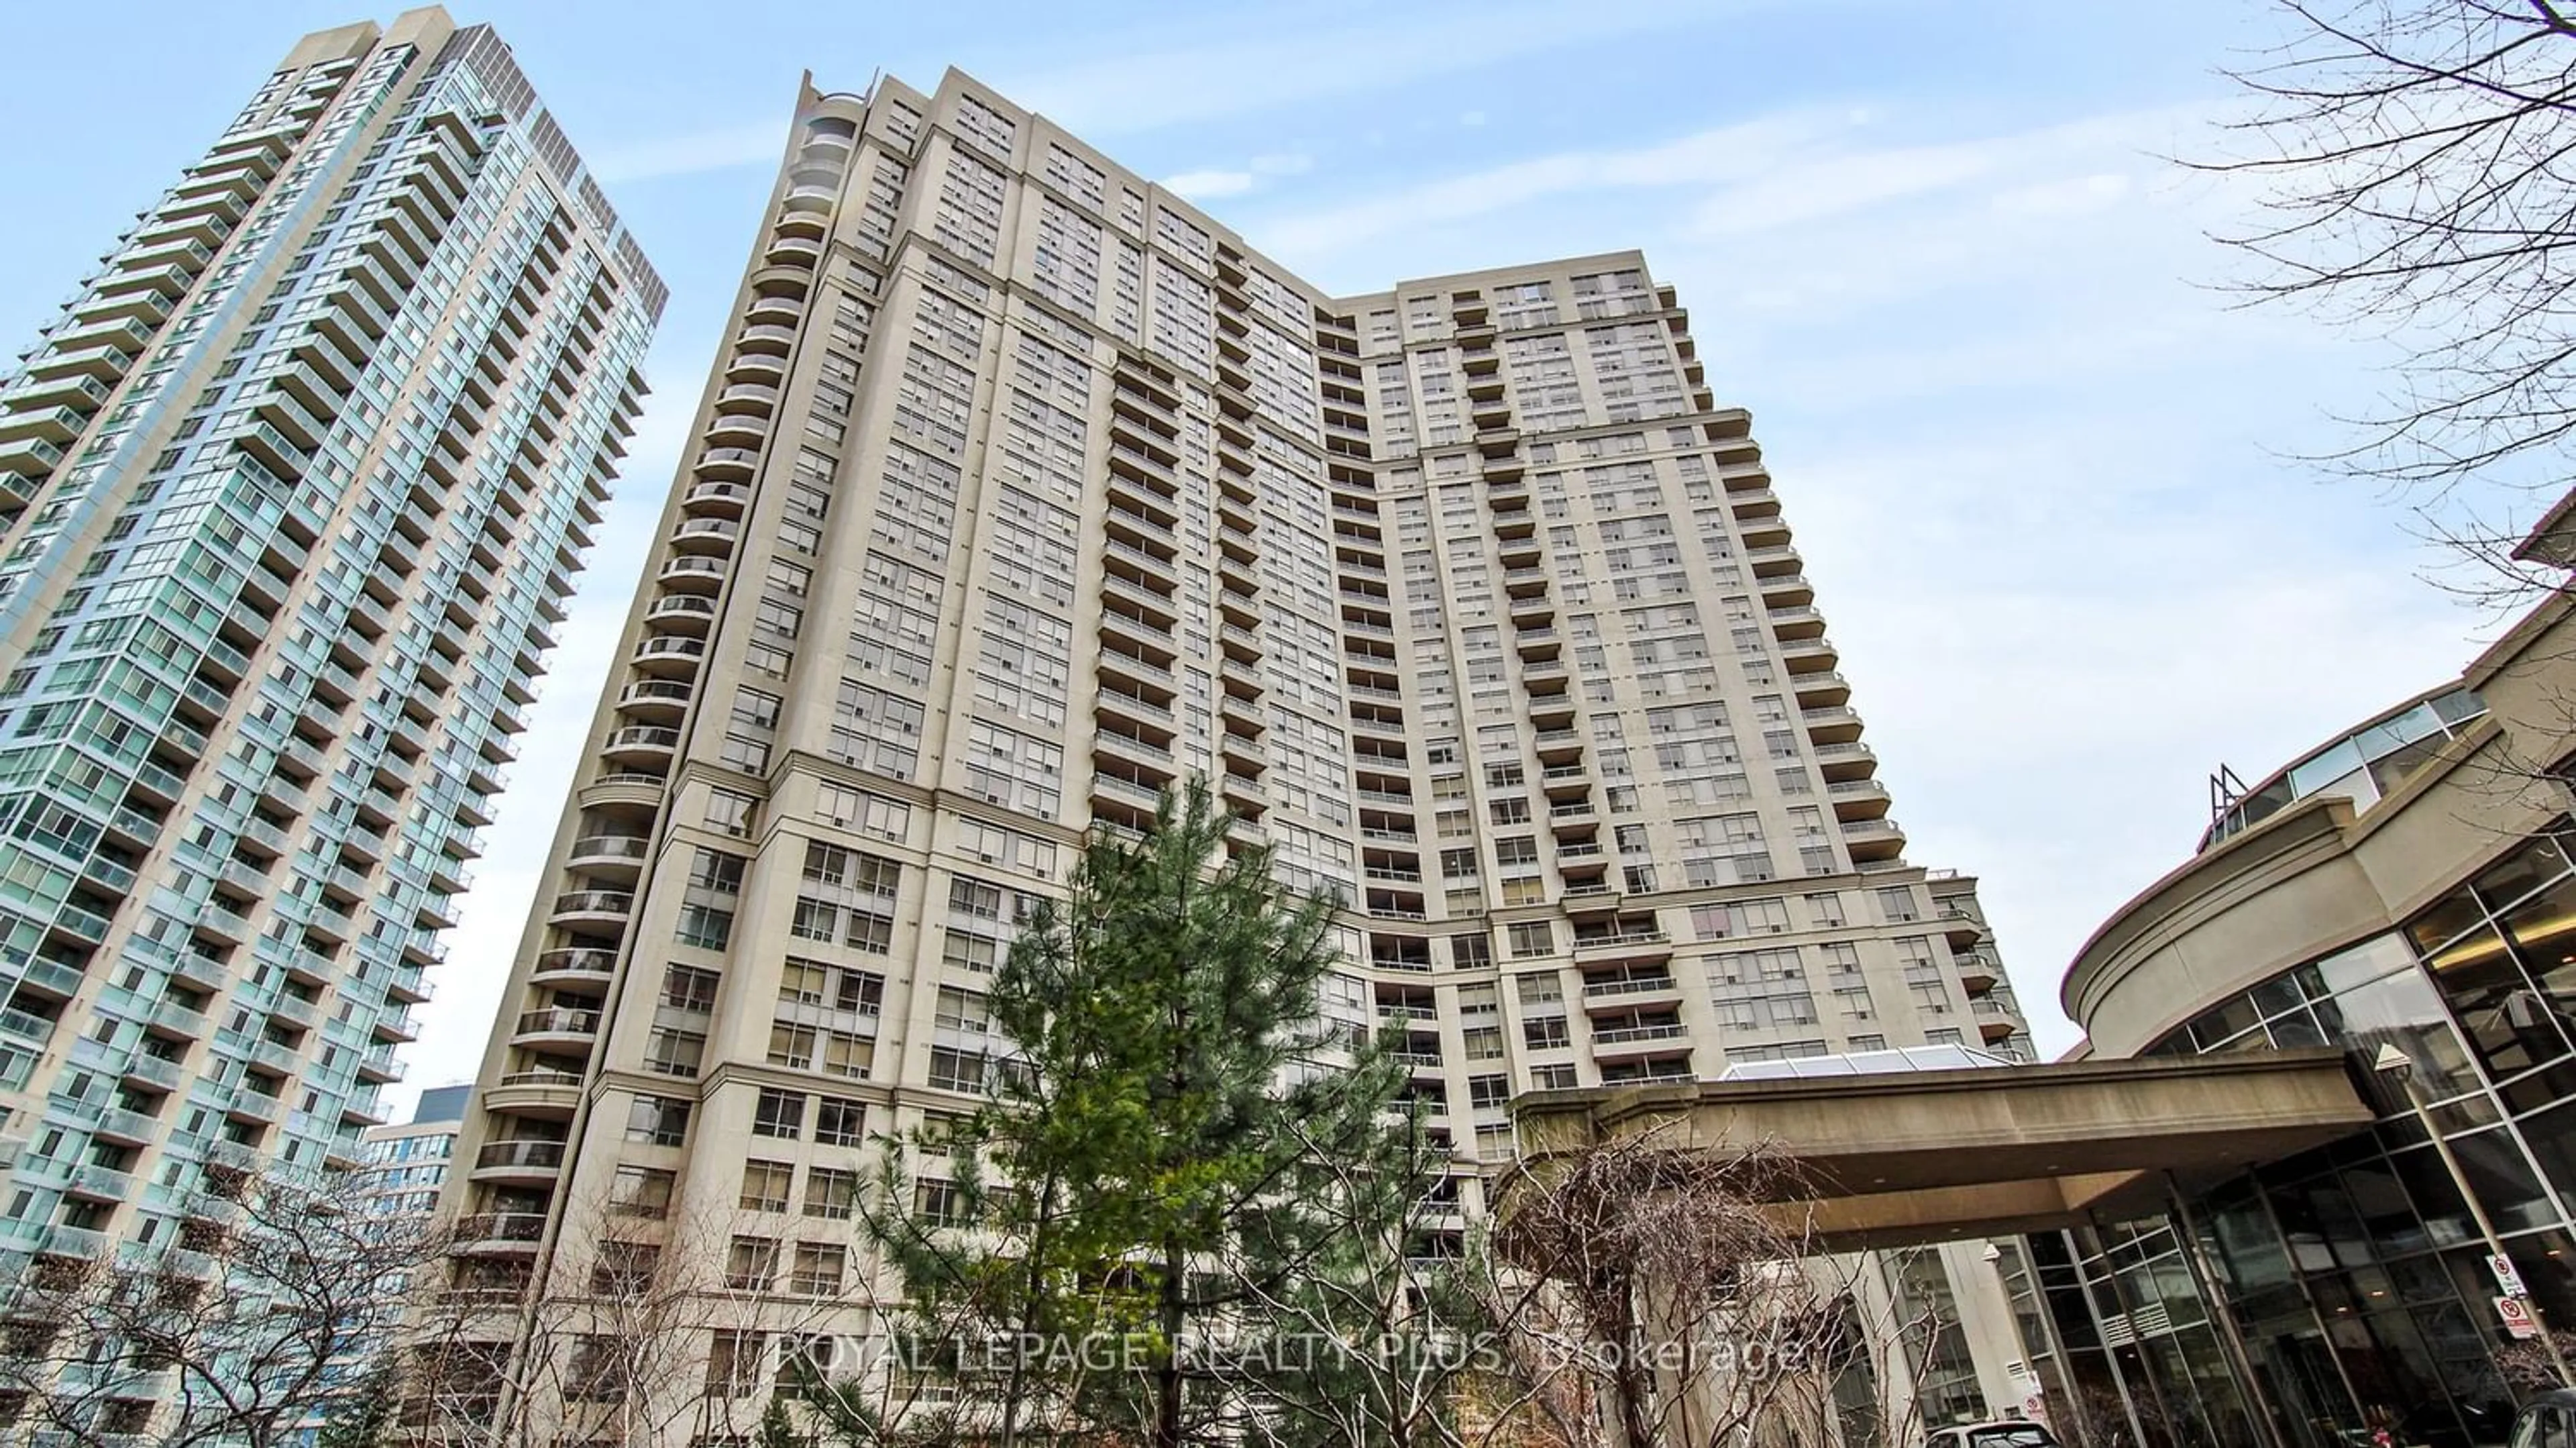 A pic from exterior of the house or condo for 3880 Duke Of York Blvd #3007, Mississauga Ontario L5B 4M7